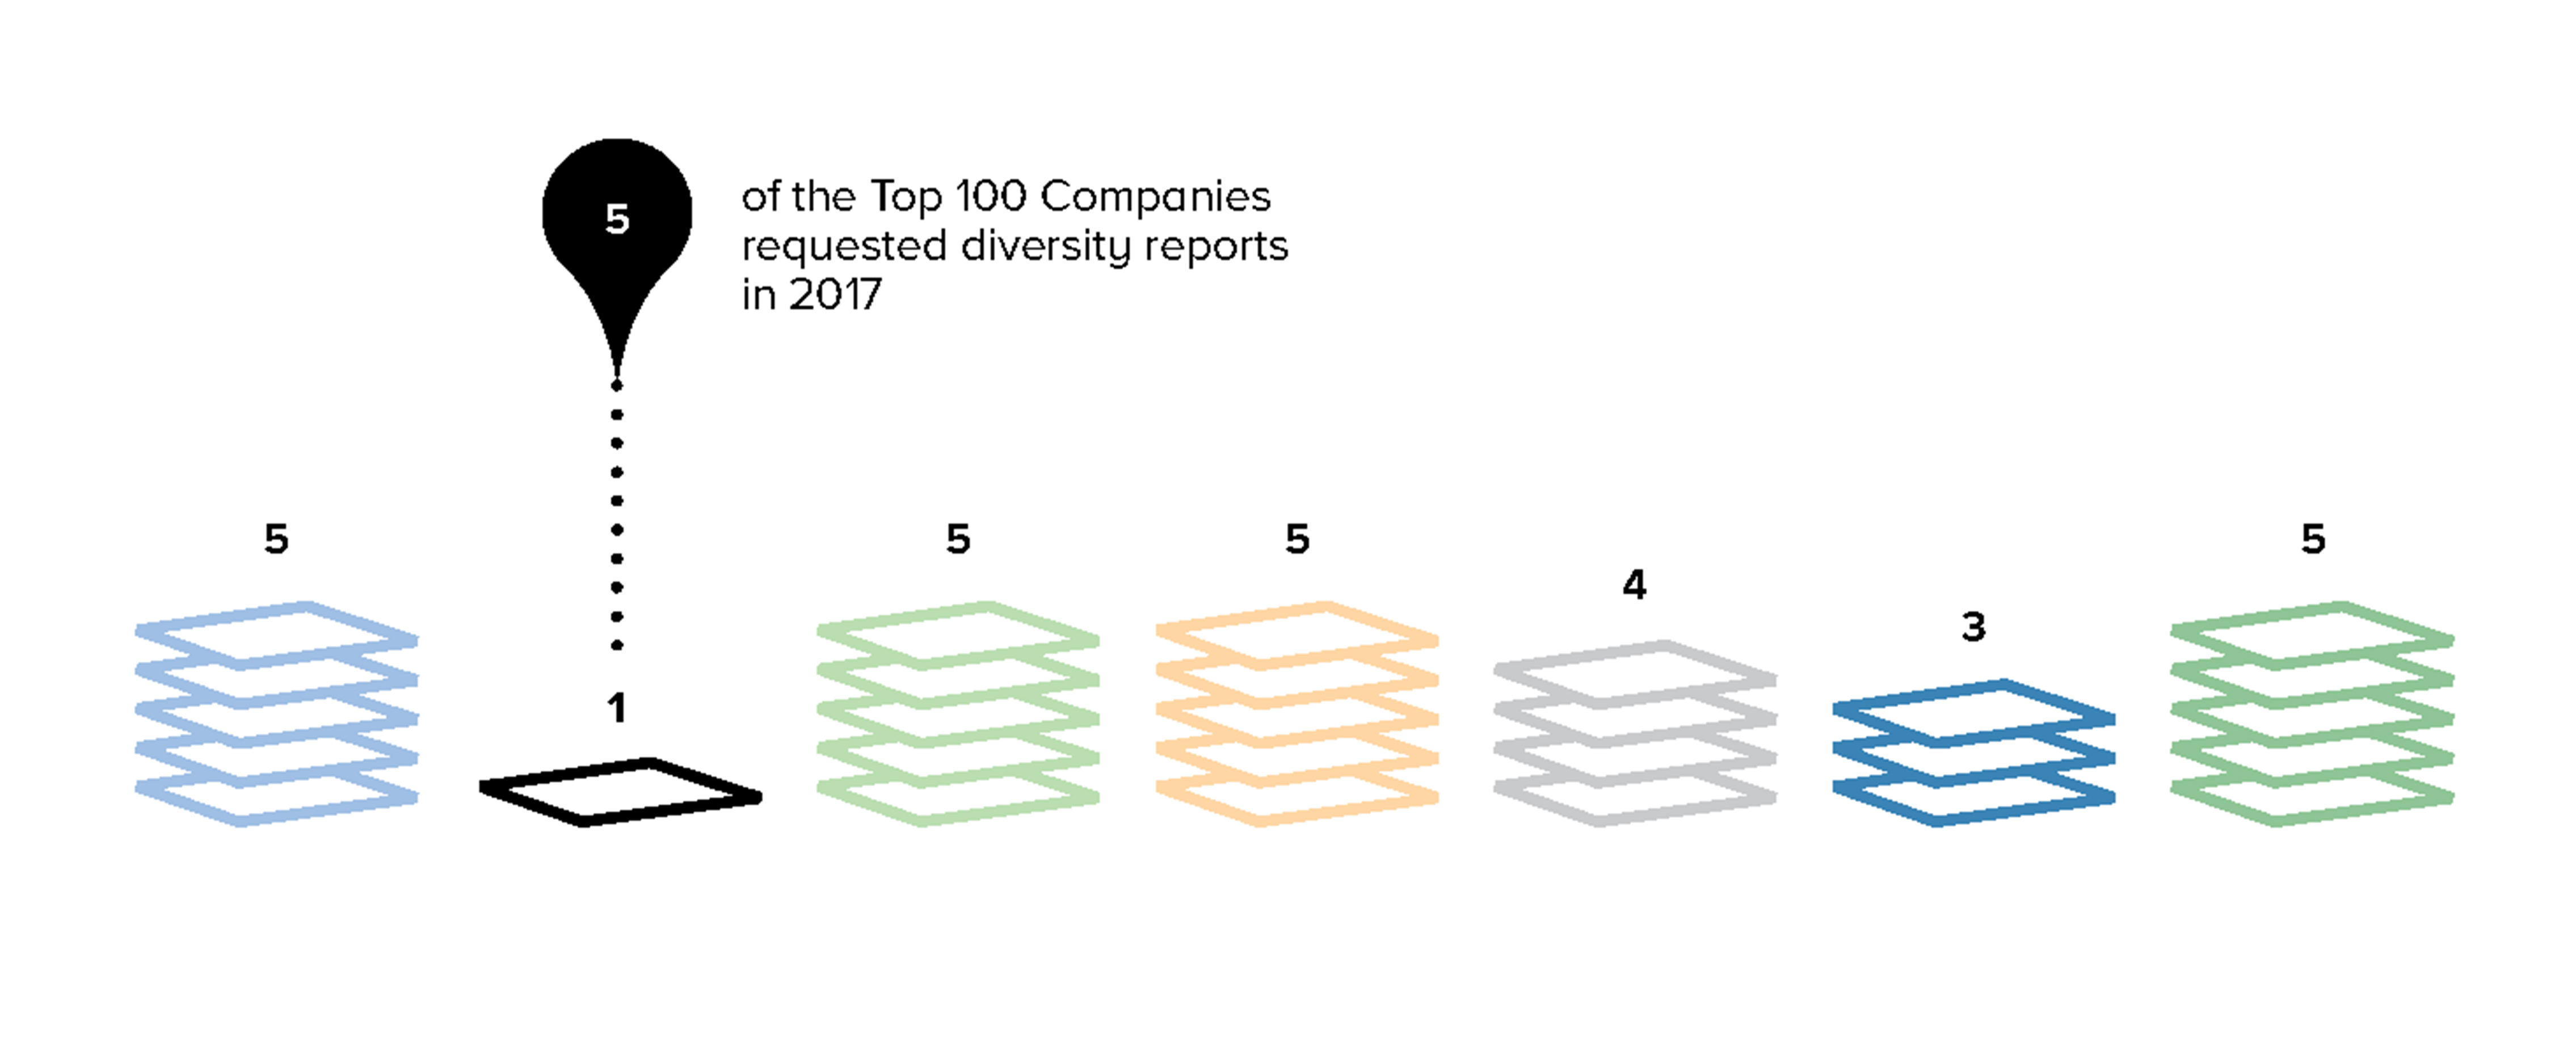 infographic of the top 100 companies requested diversity reports in 2017 